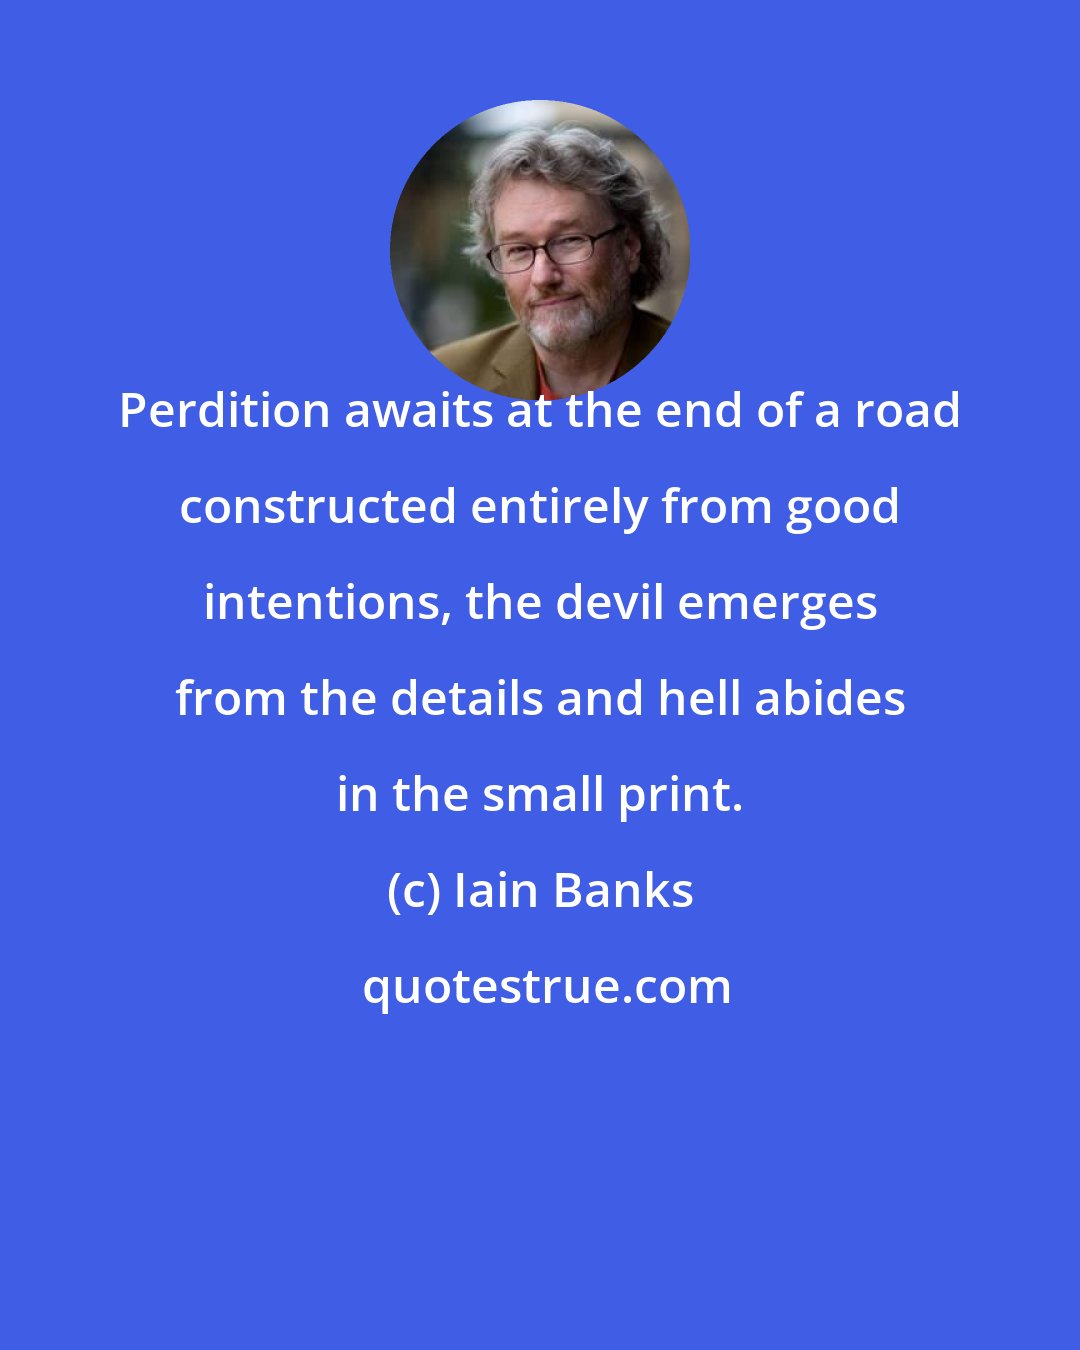 Iain Banks: Perdition awaits at the end of a road constructed entirely from good intentions, the devil emerges from the details and hell abides in the small print.